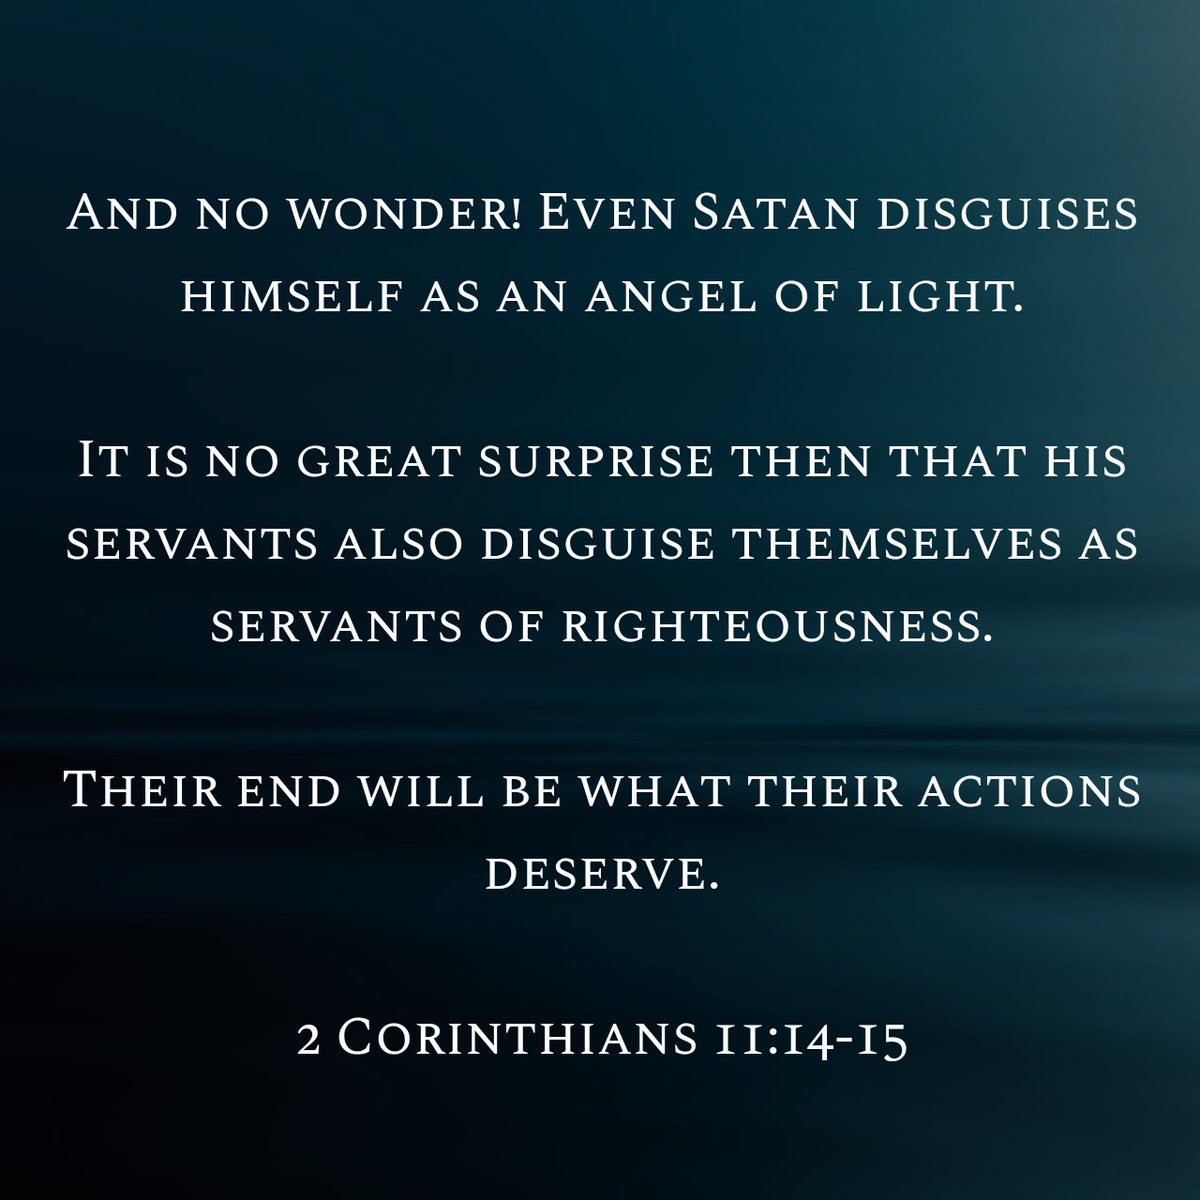 They are just like their father, the #Devil. They look #Angelic on the outside, but on the inside, they are filled to the brim with #DEMONS and #iniquity. 

#gangstalking #deception #TargetedIndividuals #targeted #TargetedIndividual #Scriptures #scripture